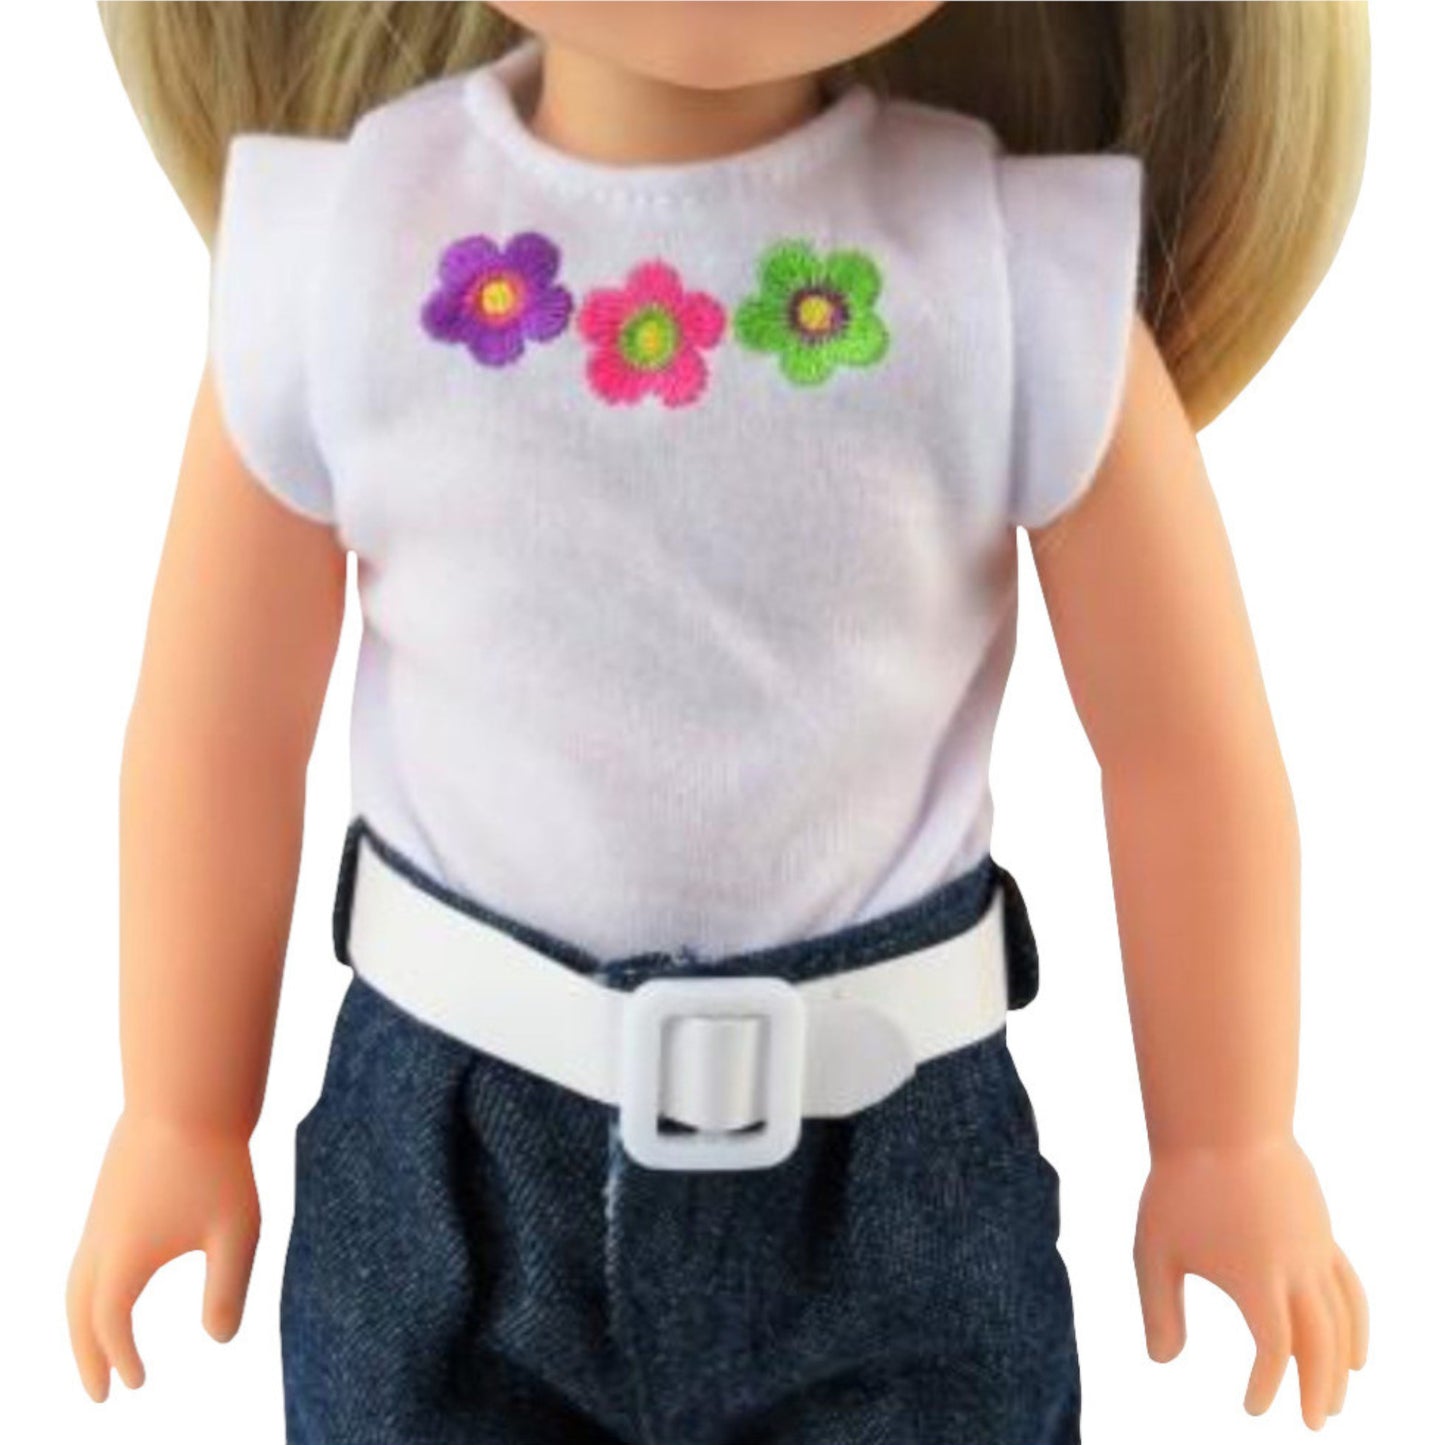 Flower Power Shirt and Jeans for 14.5 1/2-inch dolls with doll Up Close